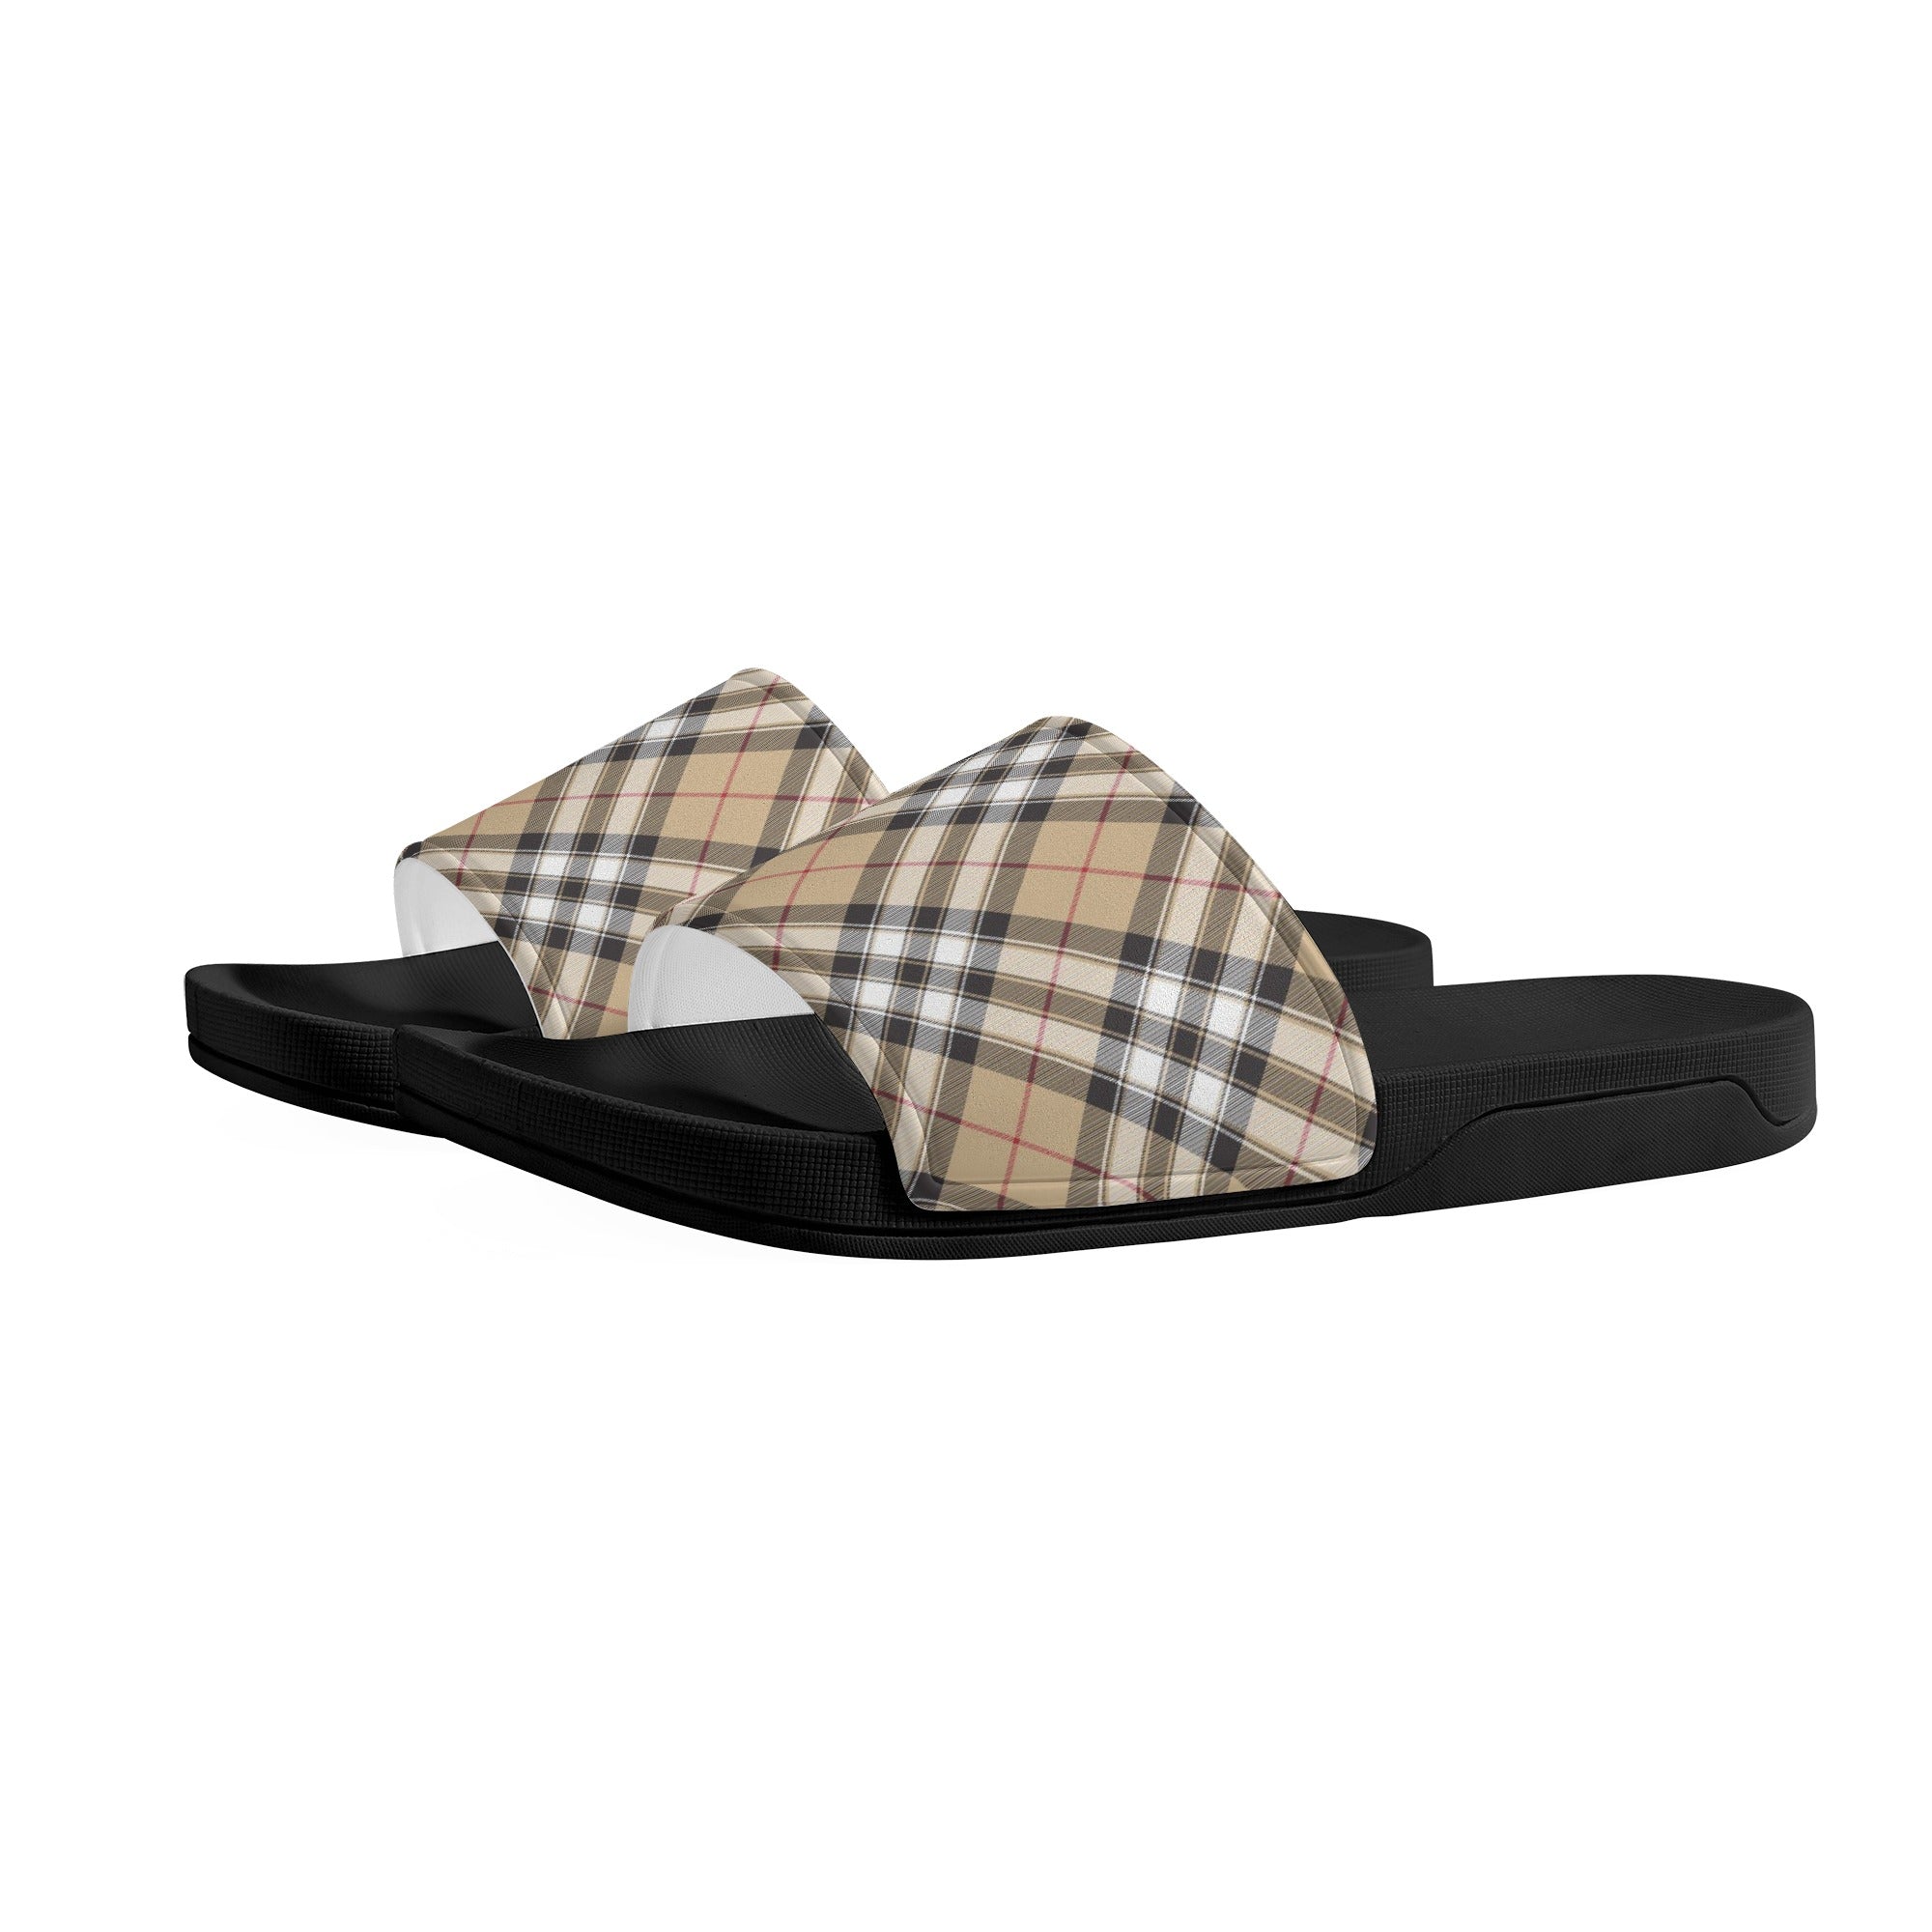 Groove Collection Beige Plaid (Red Stripe) Women's Slide Sandal Shoes